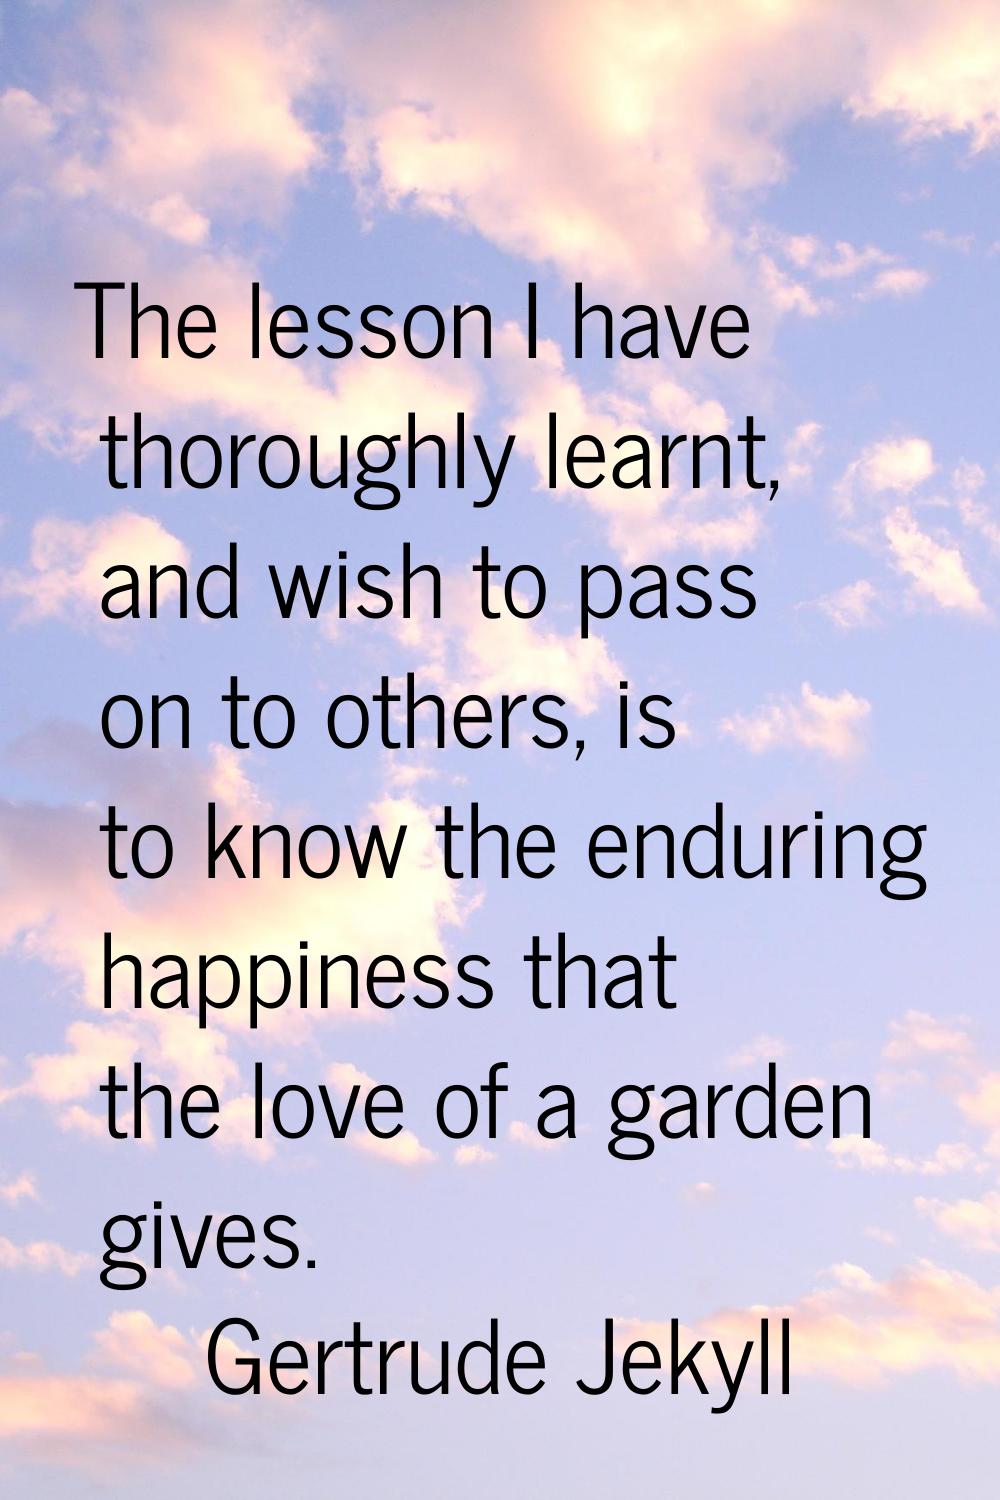 The lesson I have thoroughly learnt, and wish to pass on to others, is to know the enduring happine